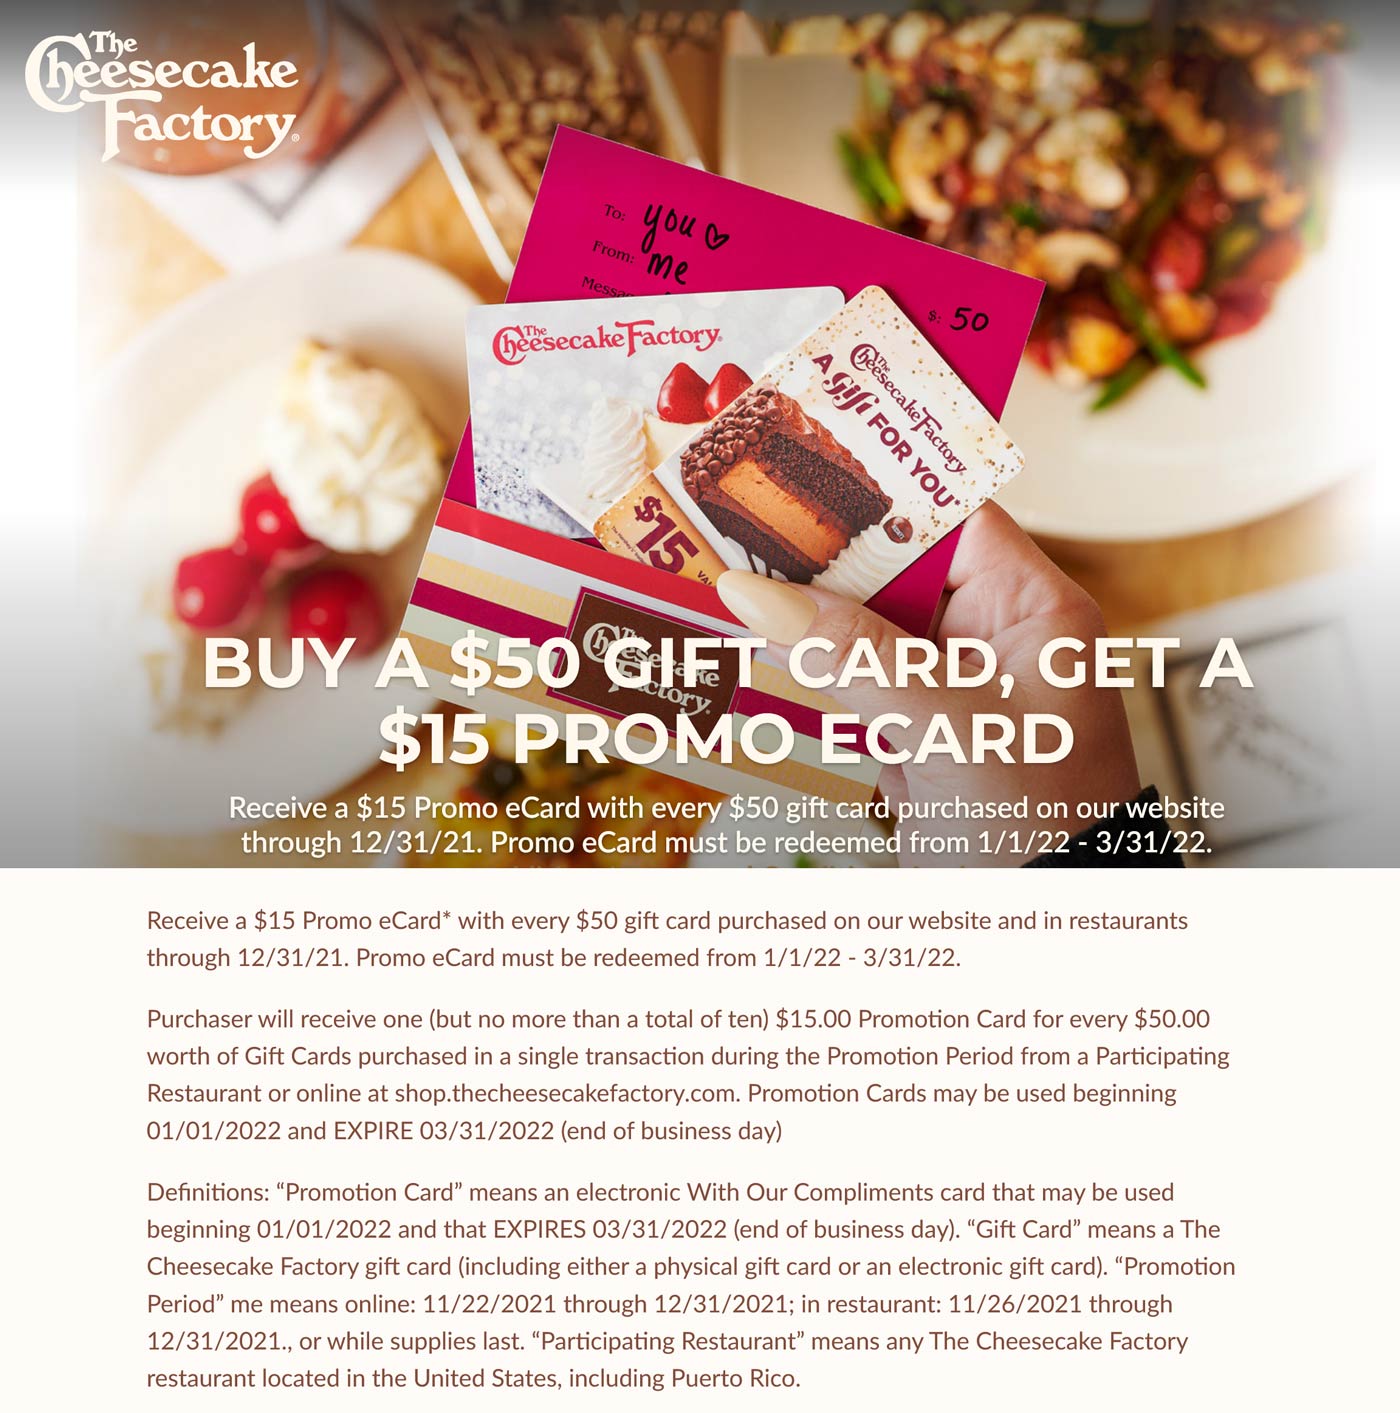 The Cheesecake Factory restaurants Coupon  Free $15 card with every $50 card at The Cheesecake Factory restaurants #thecheesecakefactory 